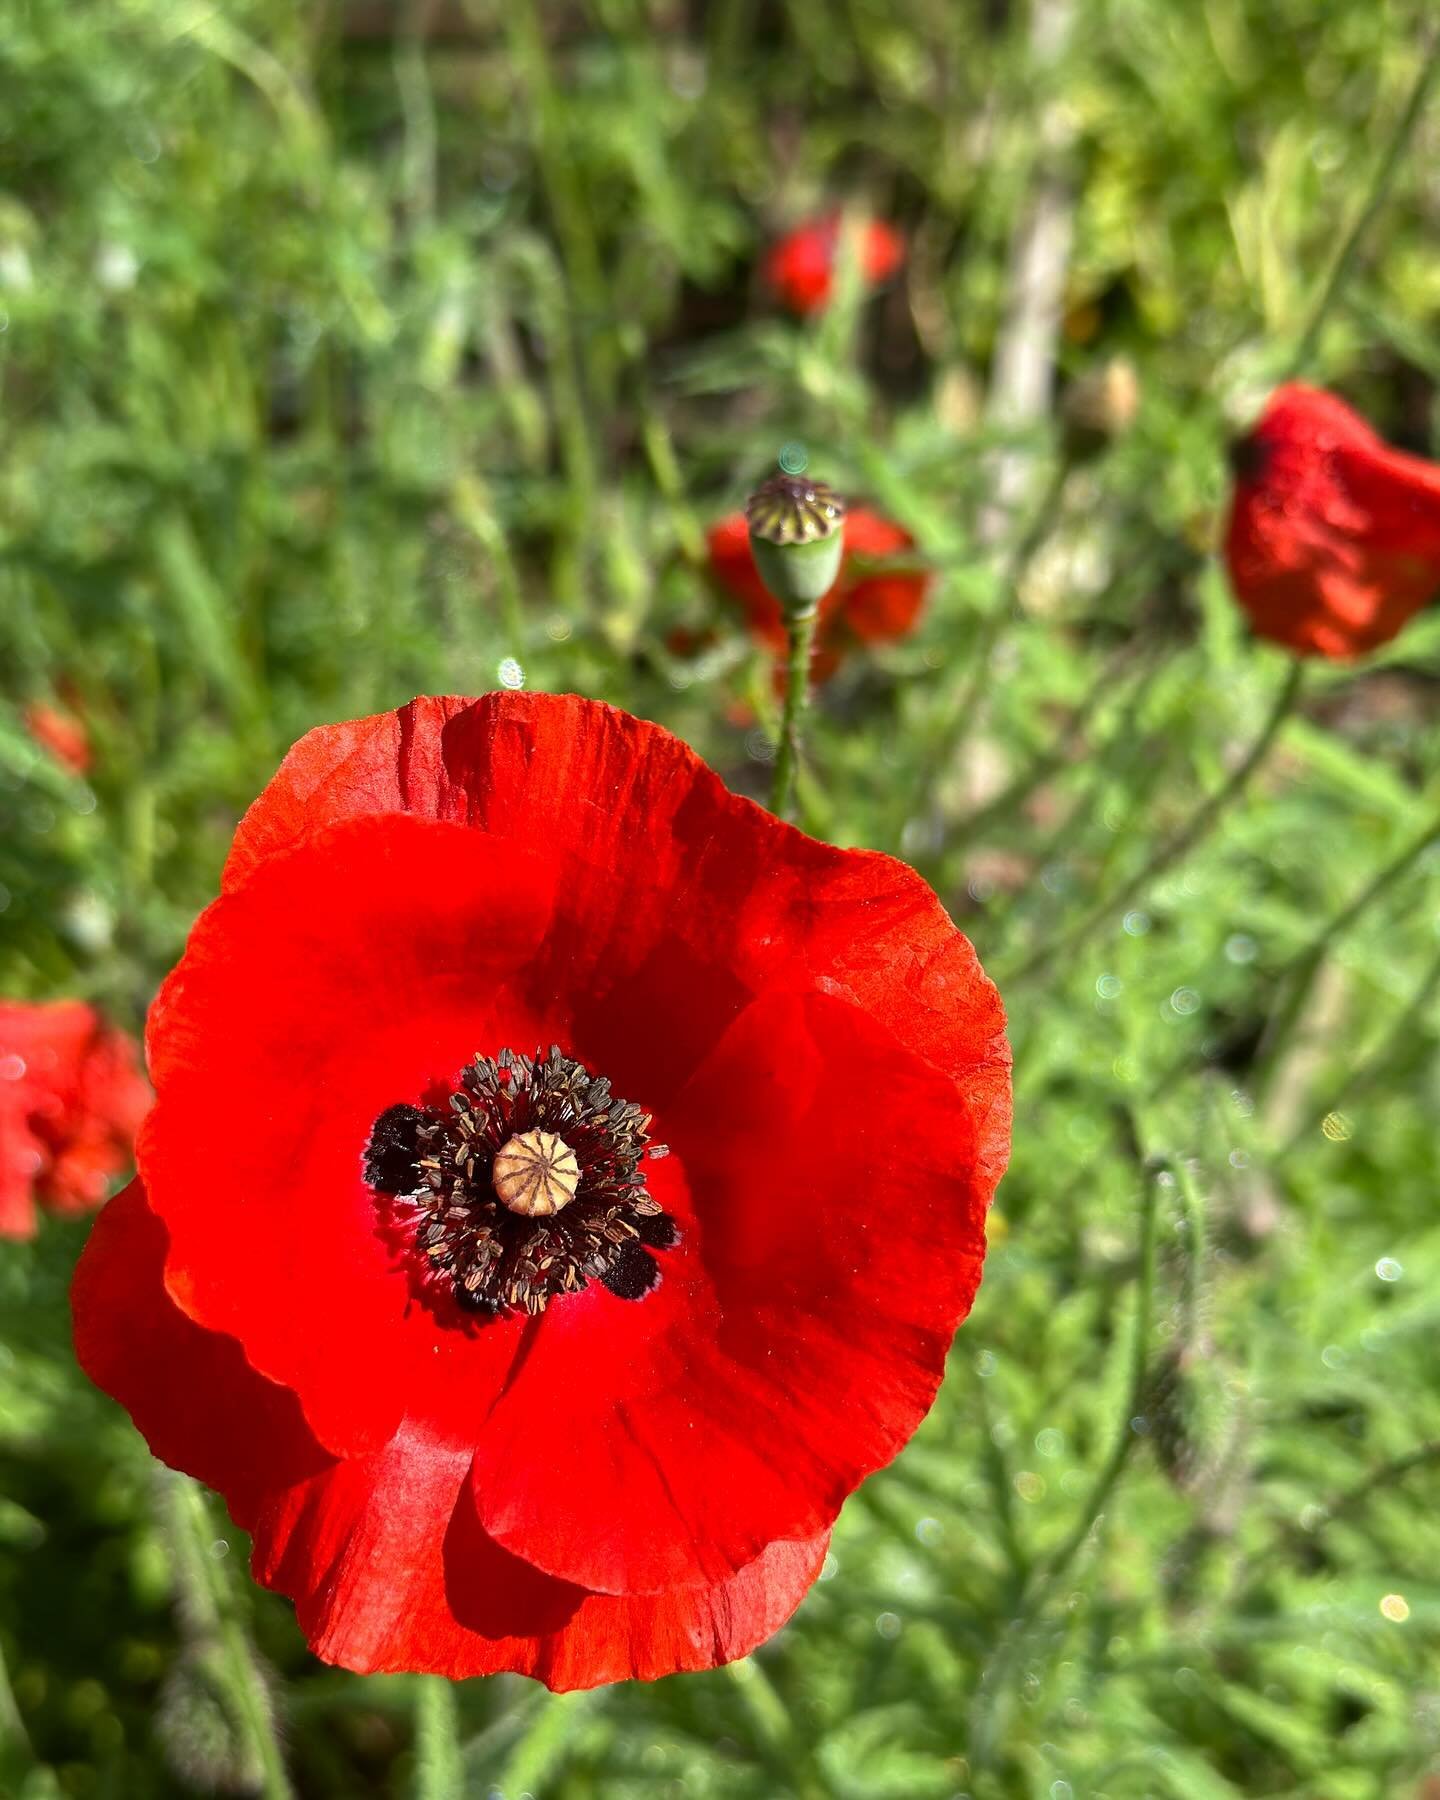 In Flanders Fields

In Flanders fields the poppies blow
Between the crosses, row on row,
 That mark our place; and in the sky
  The larks, still bravely singing, fly
Scarce heard amid the guns below.

We are the Dead. Short days ago
We lived, felt da